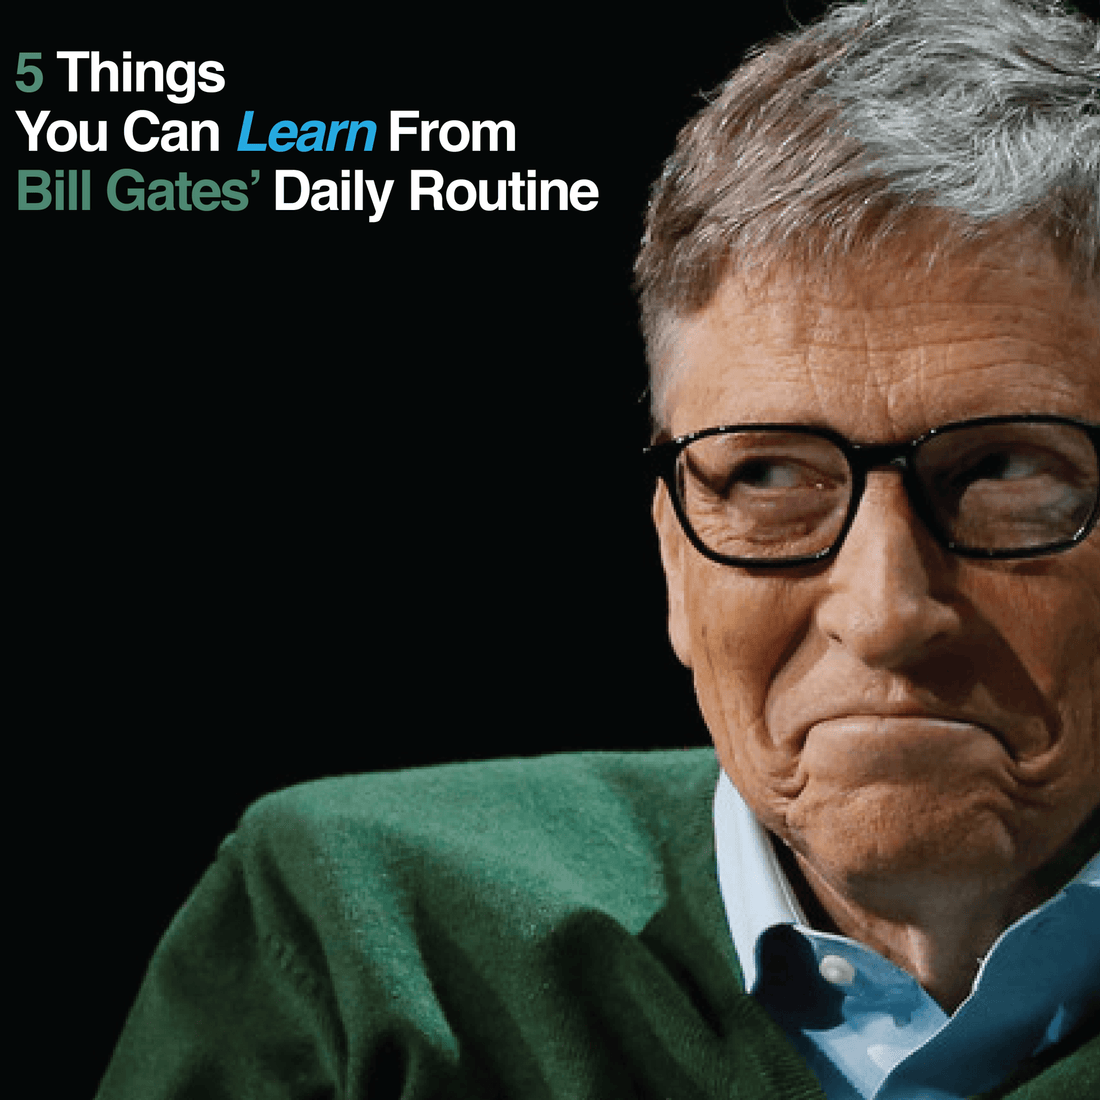 5 Things You Can Learn From Bill Gates’ Daily Routine - The House of Routine